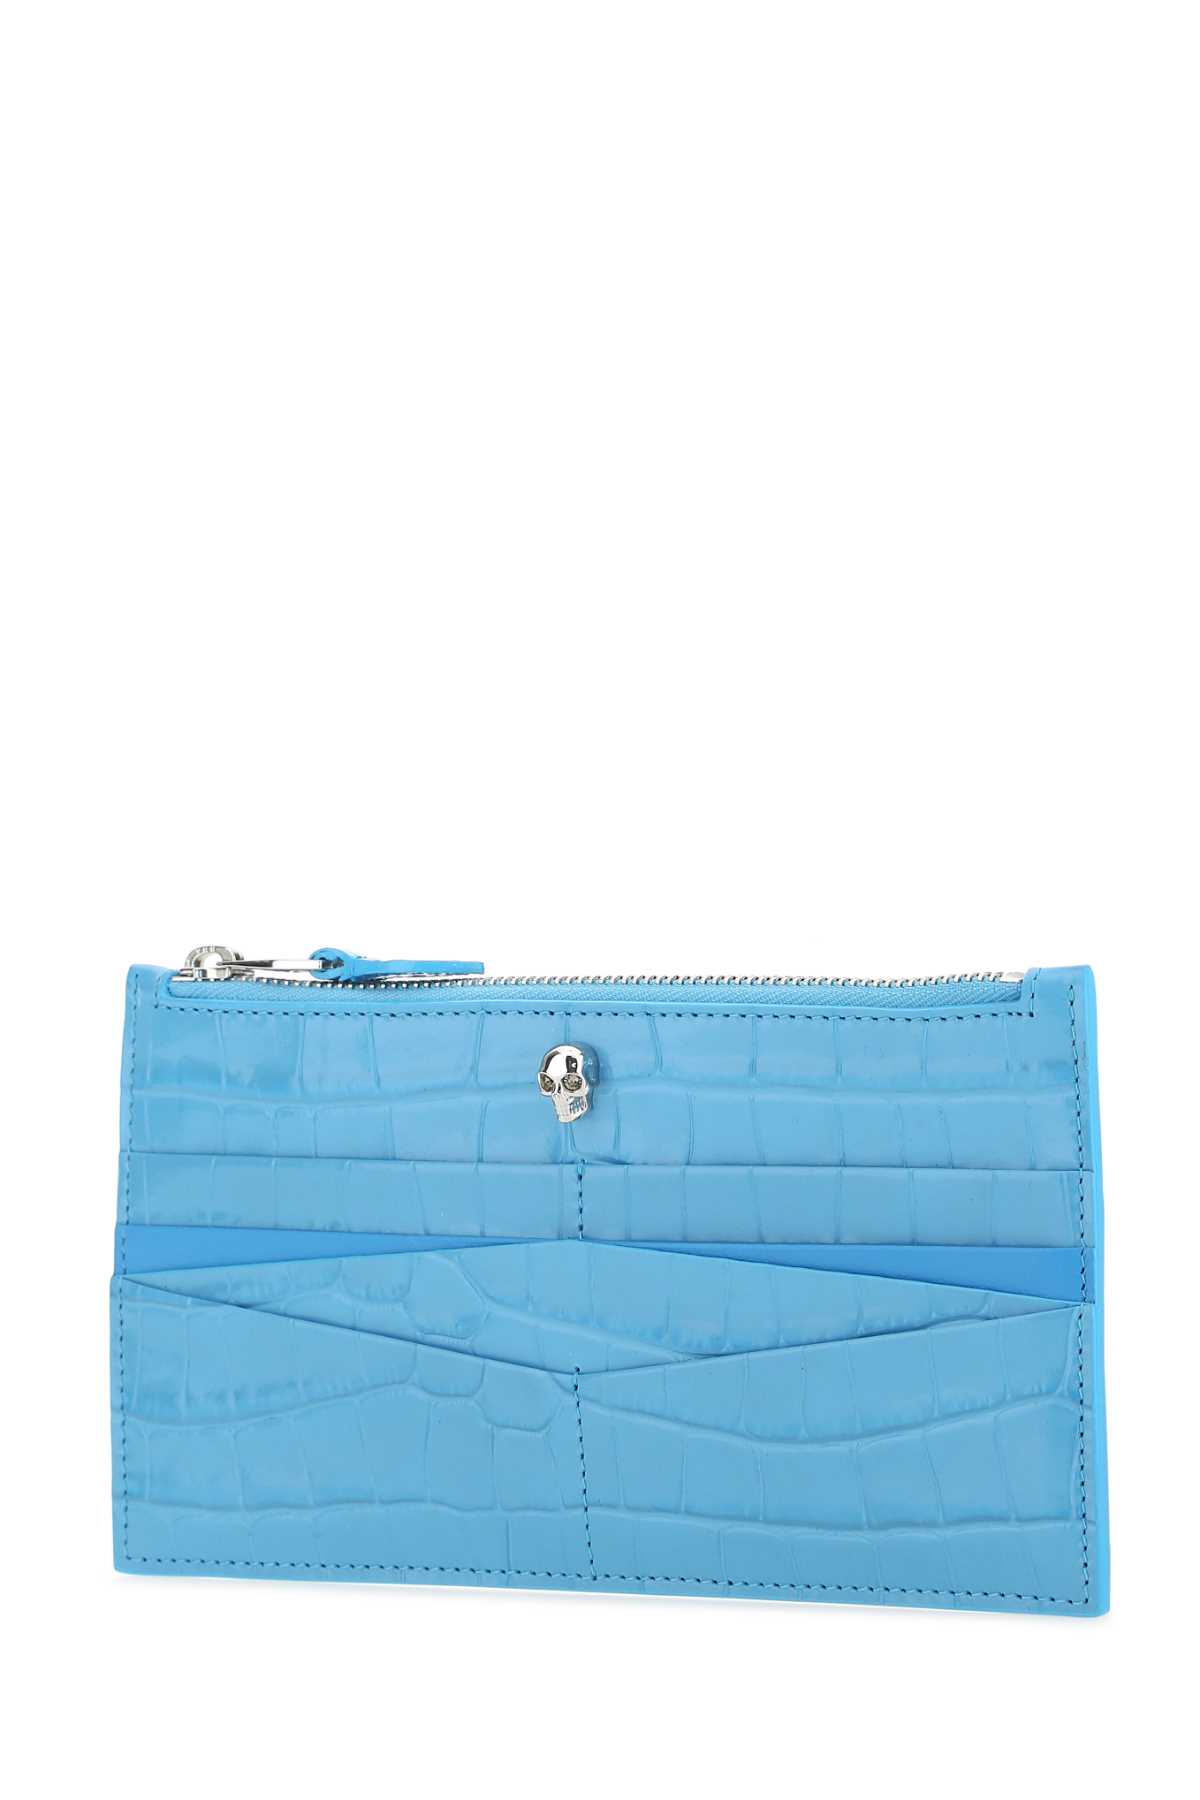 Alexander Mcqueen Light-blue Leather Pouch In 4722